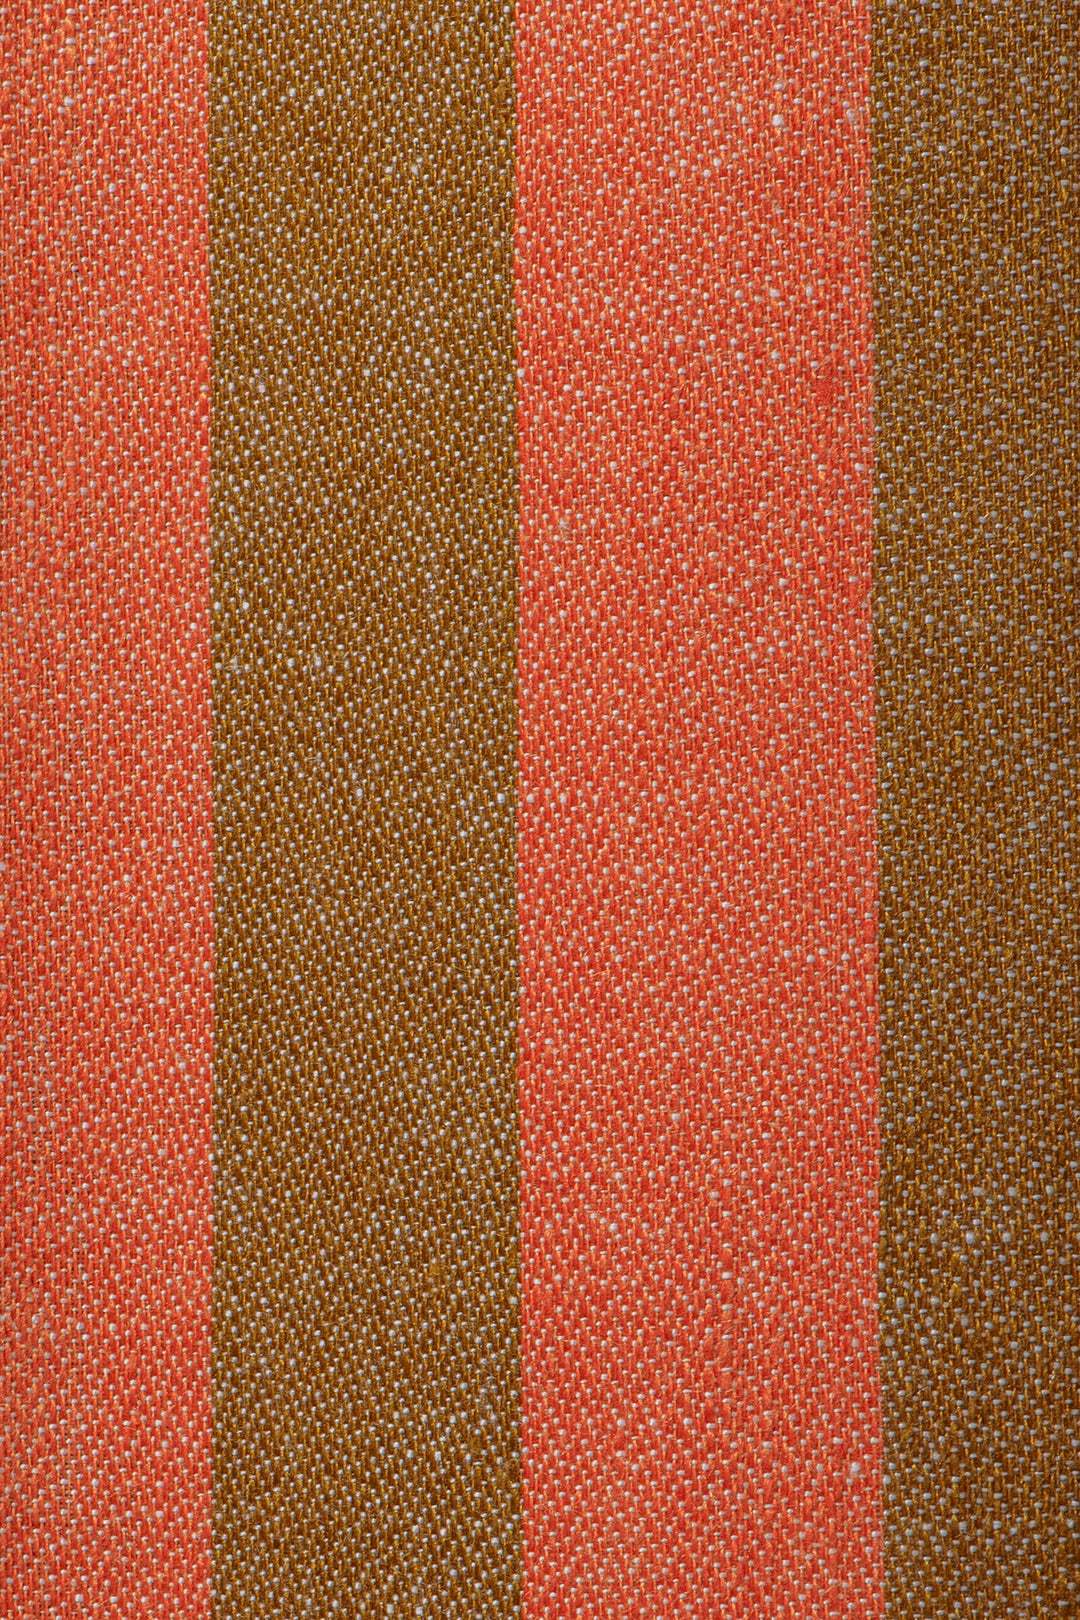 Jackie Cushion - Spice & Coral